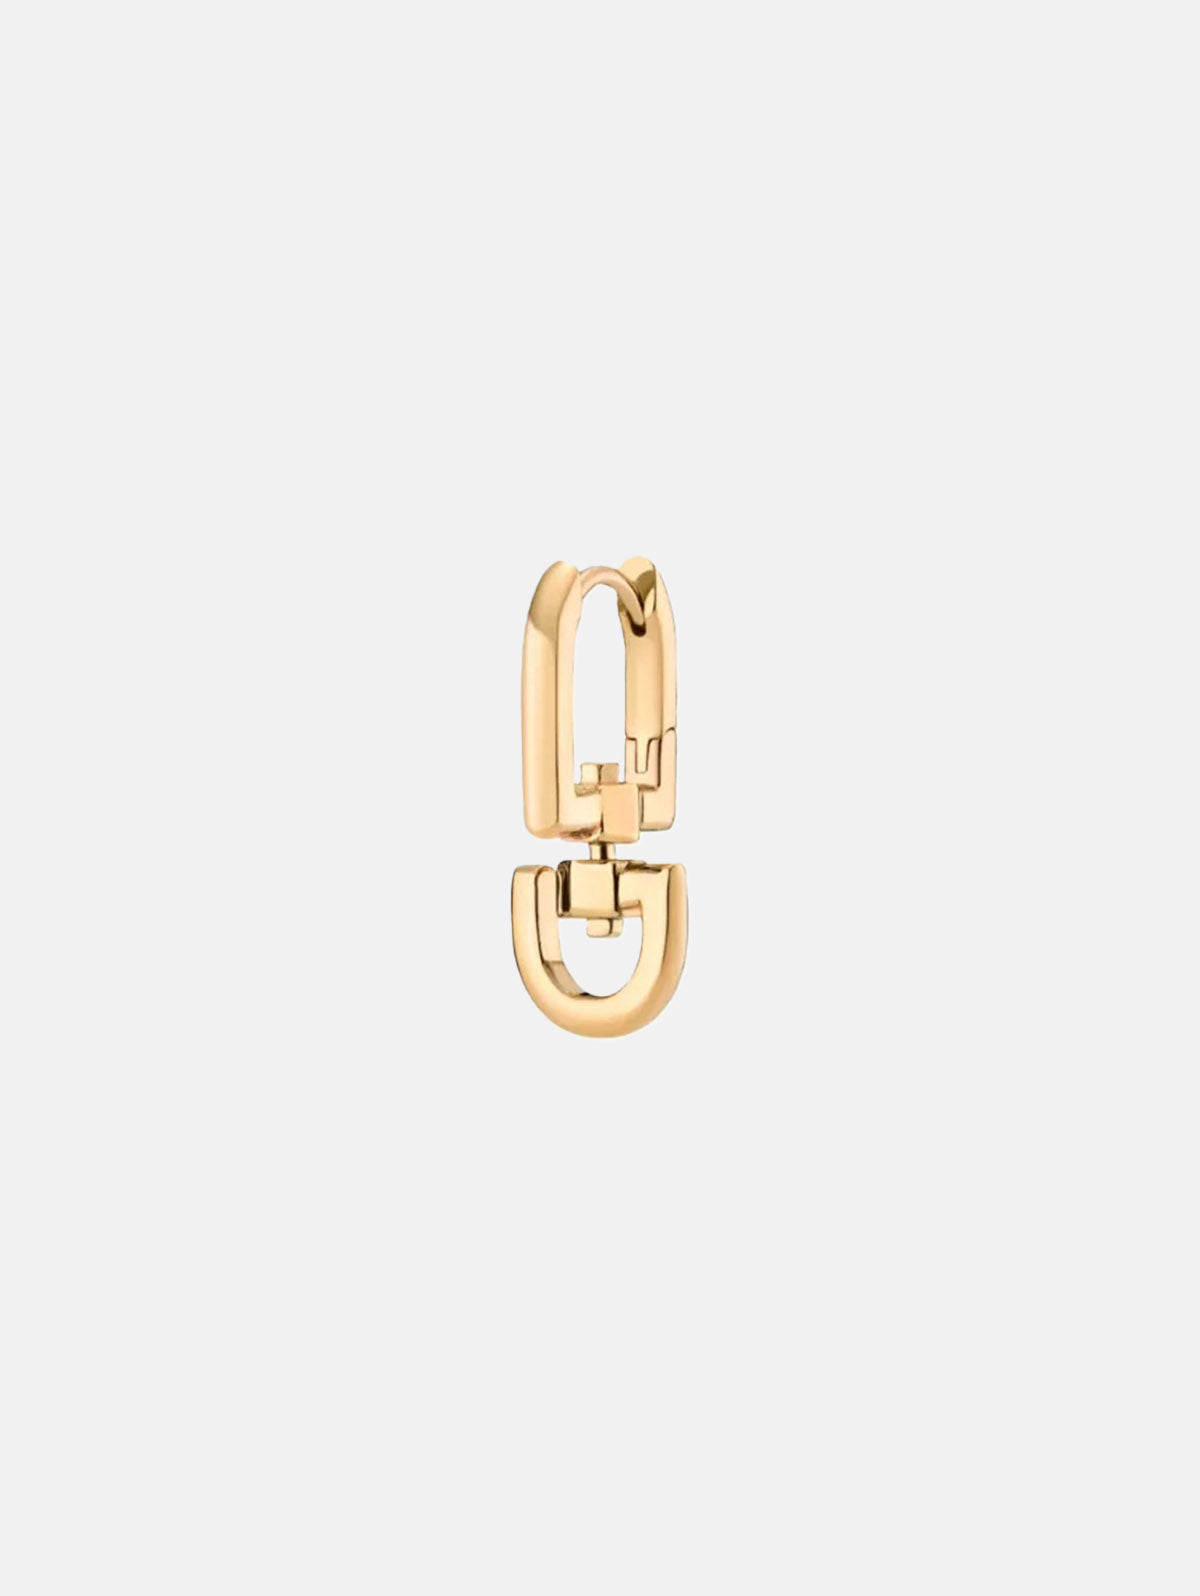 The-Lair-Maria-Black-Carabiner-Huggie-22K-Yellow-Gold-Plated